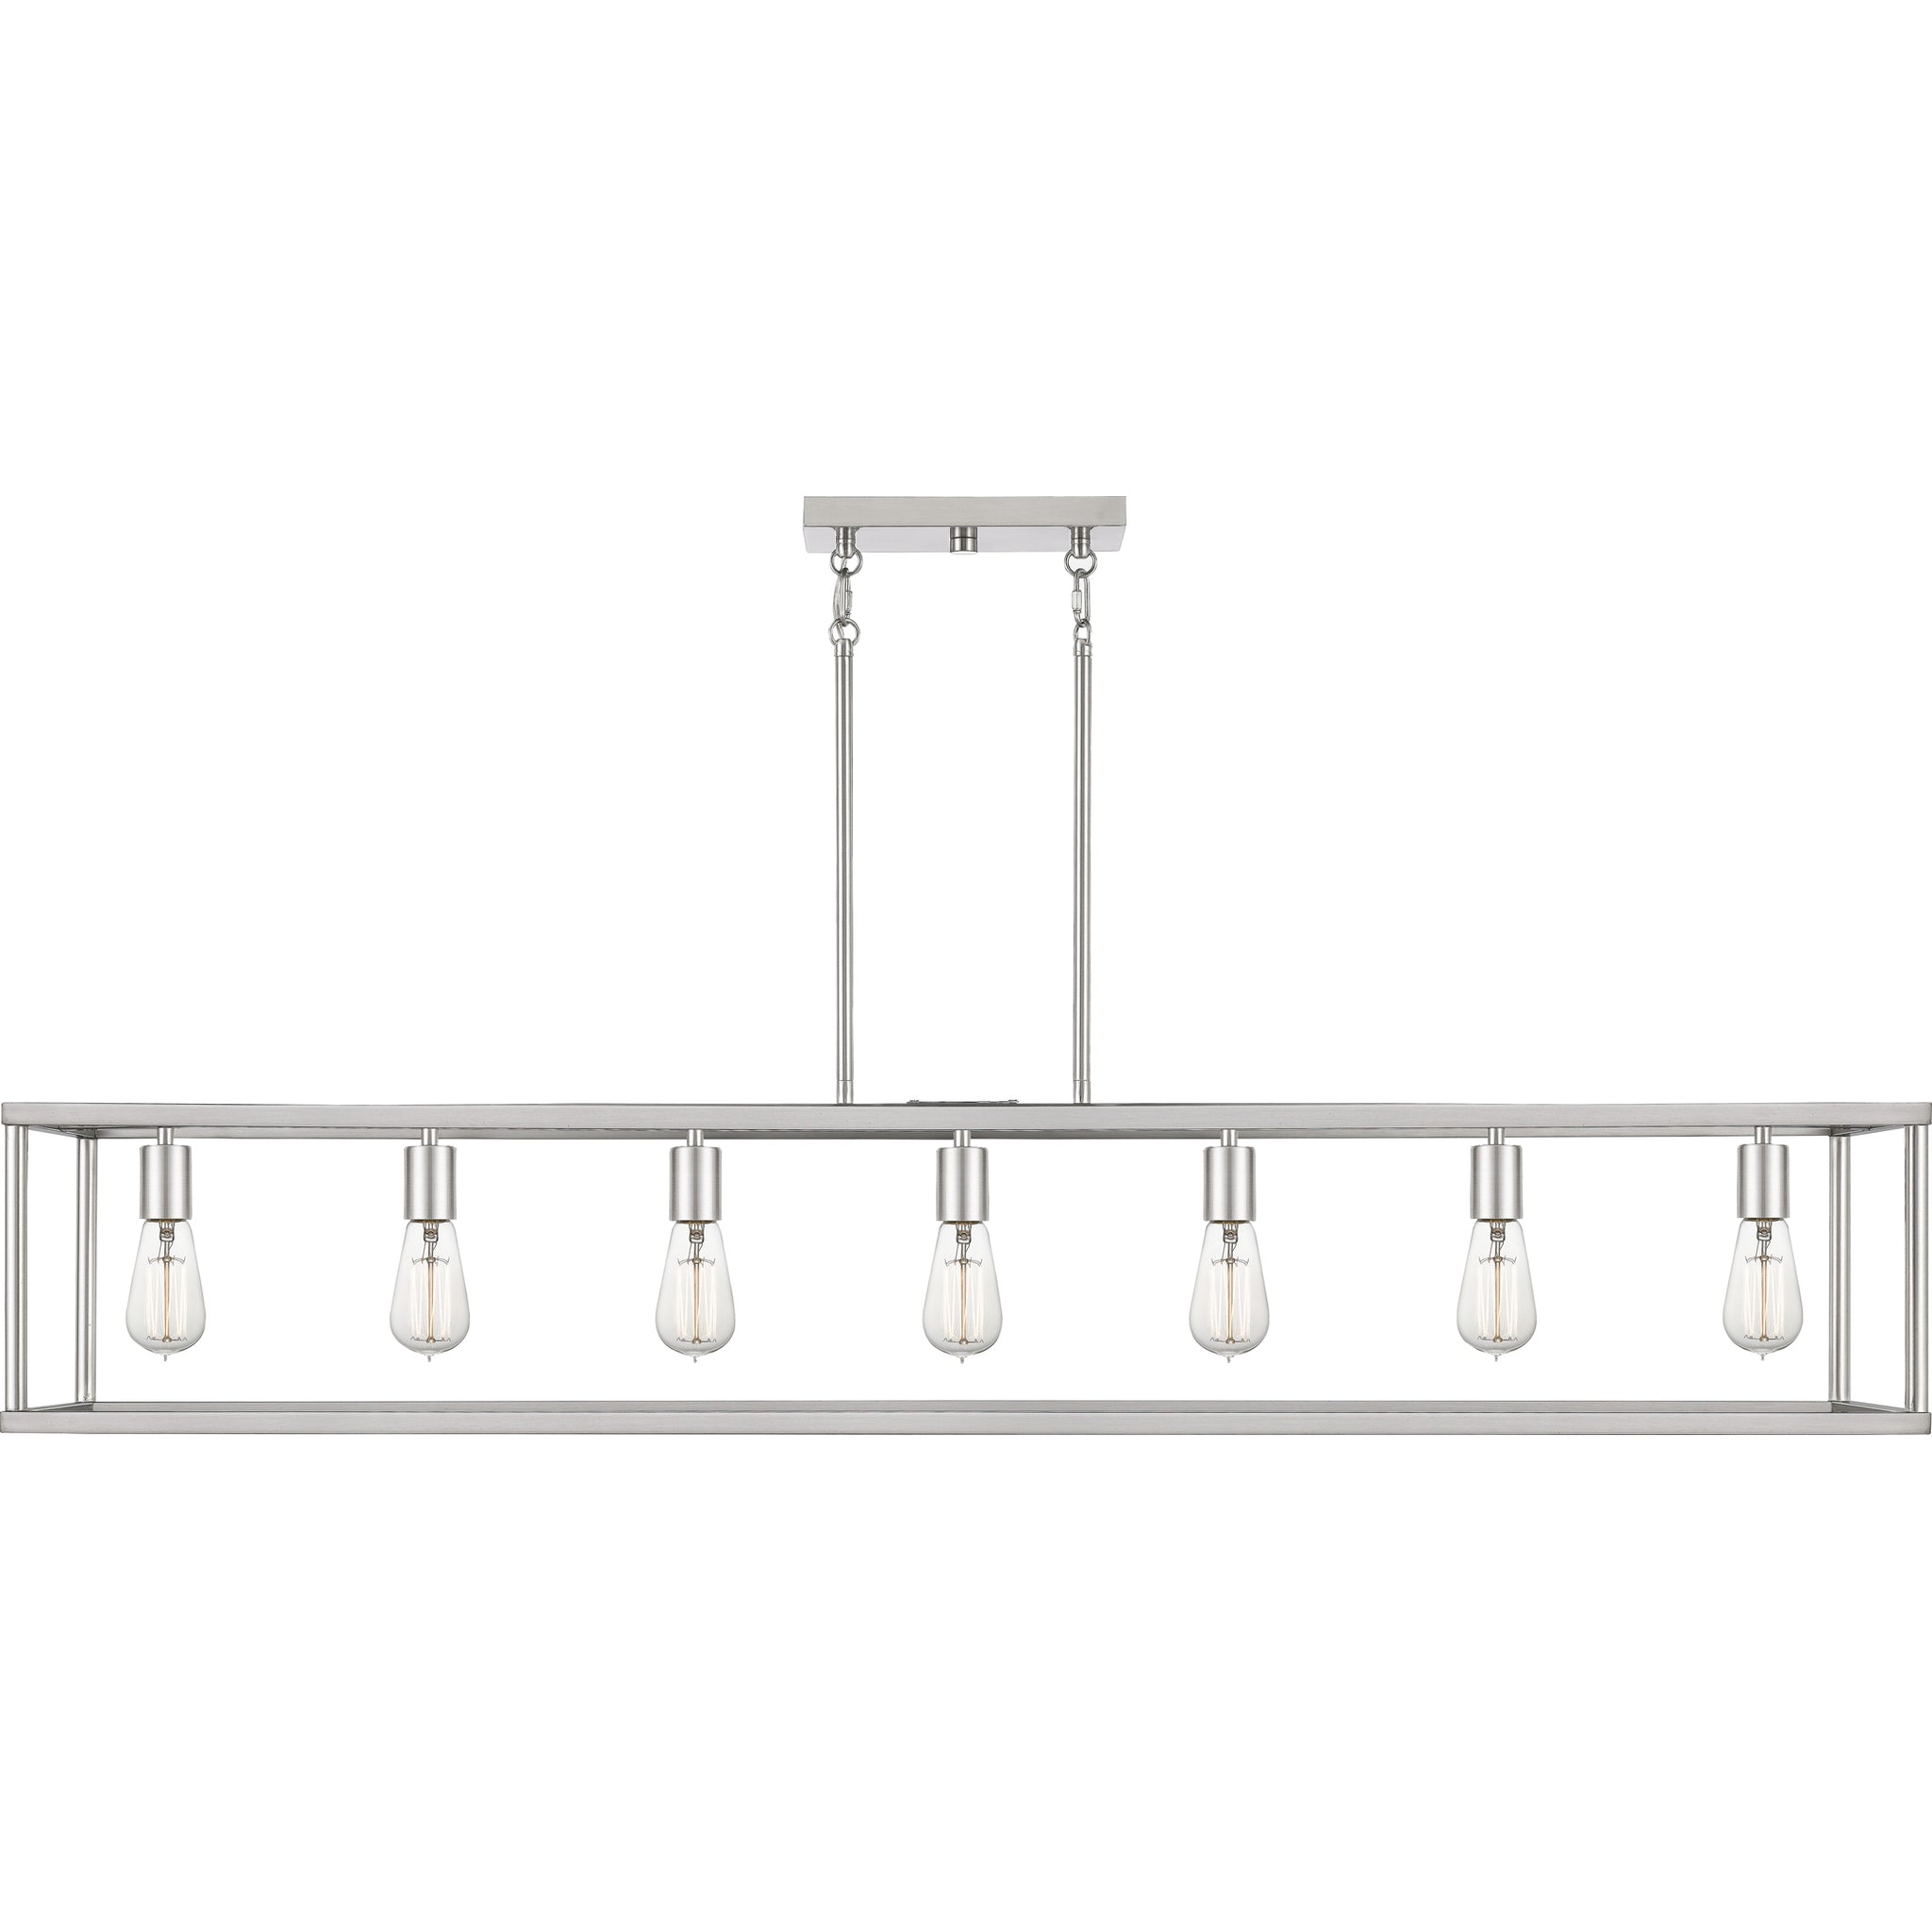 New Harbor Linear Suspension Brushed Nickel